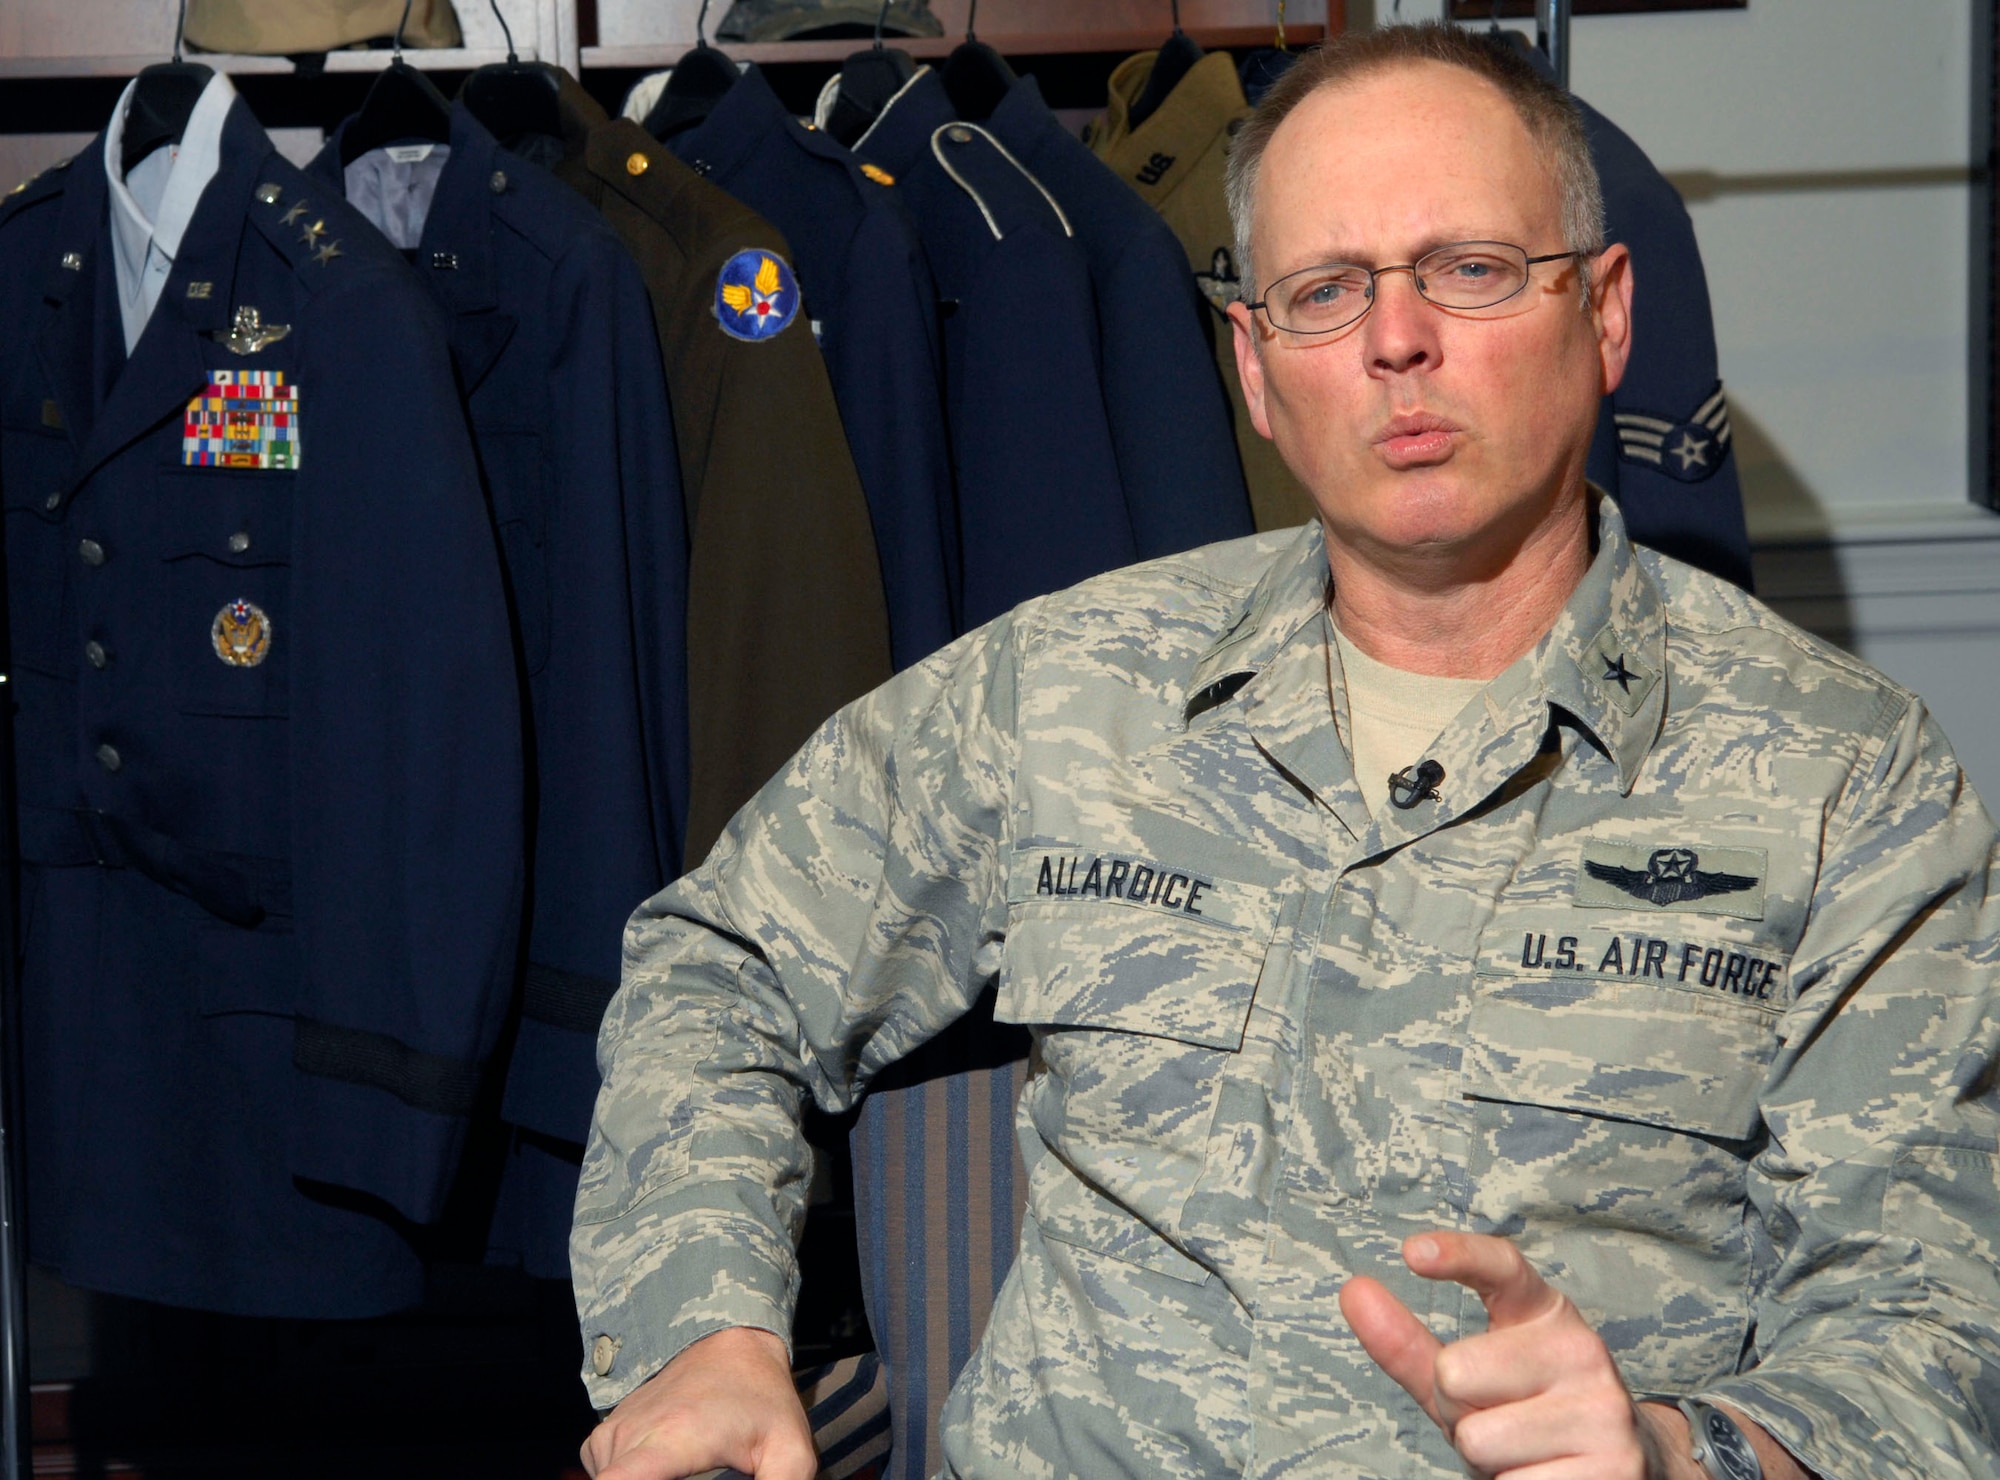 Brig. Gen. Robert R. Allardice talks about the new service coat and Airman Battle Uniform uniform during an interview Feb. 26. The new ABUs will start being distributed to Airmen participating in AEF 7 and 8 before the rest of the Air Force receives them. (U.S. Air Force photo/Tech. Sgt. Cohen A. Young) 